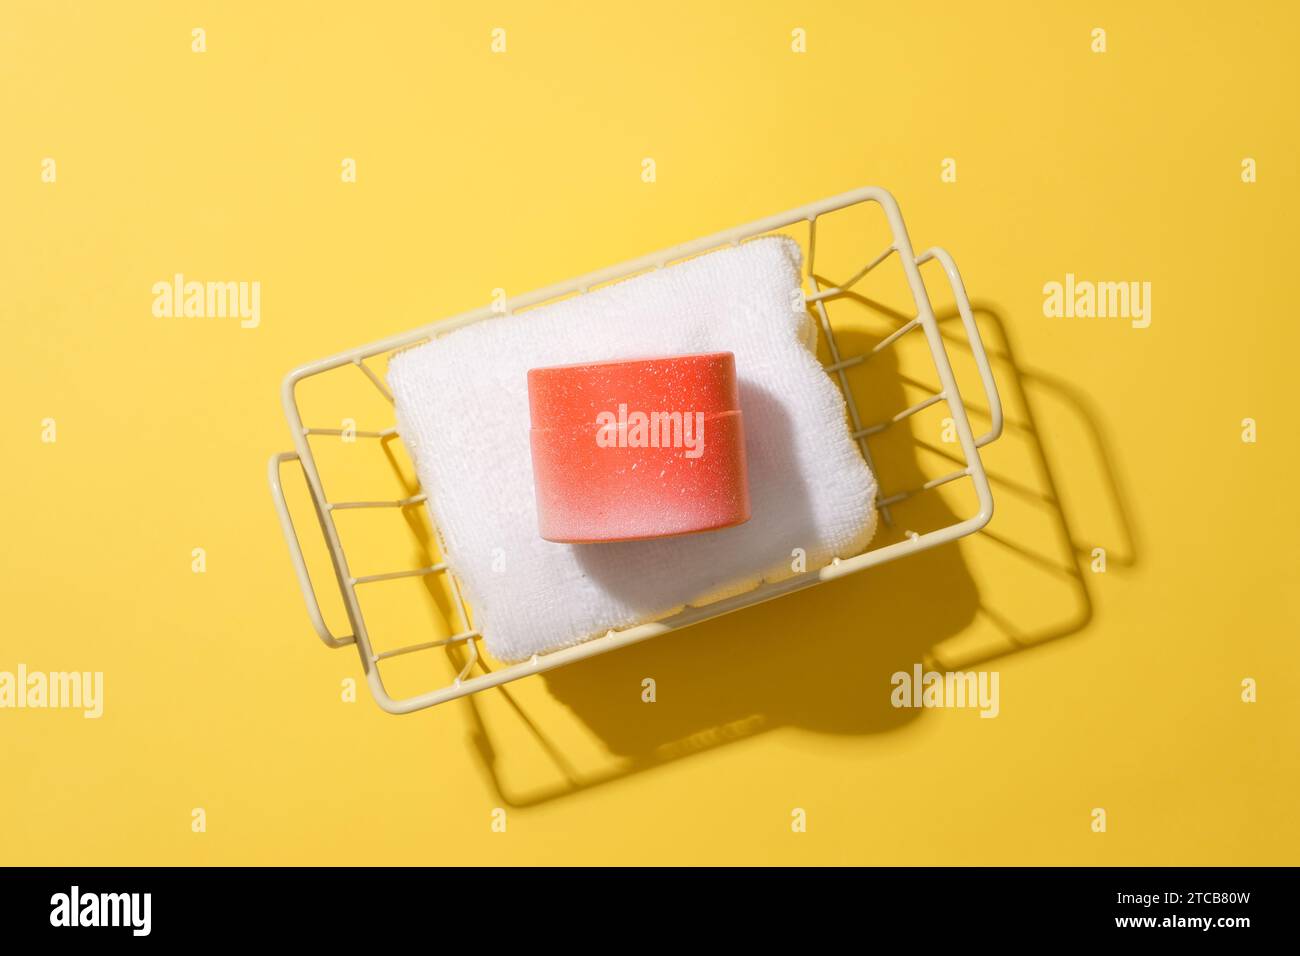 Close-up of a cosmetic jar lying on a towel rolled up in an iron mesh basket. Bright yellow background. Cosmetic mockup for advertising. Blank label f Stock Photo